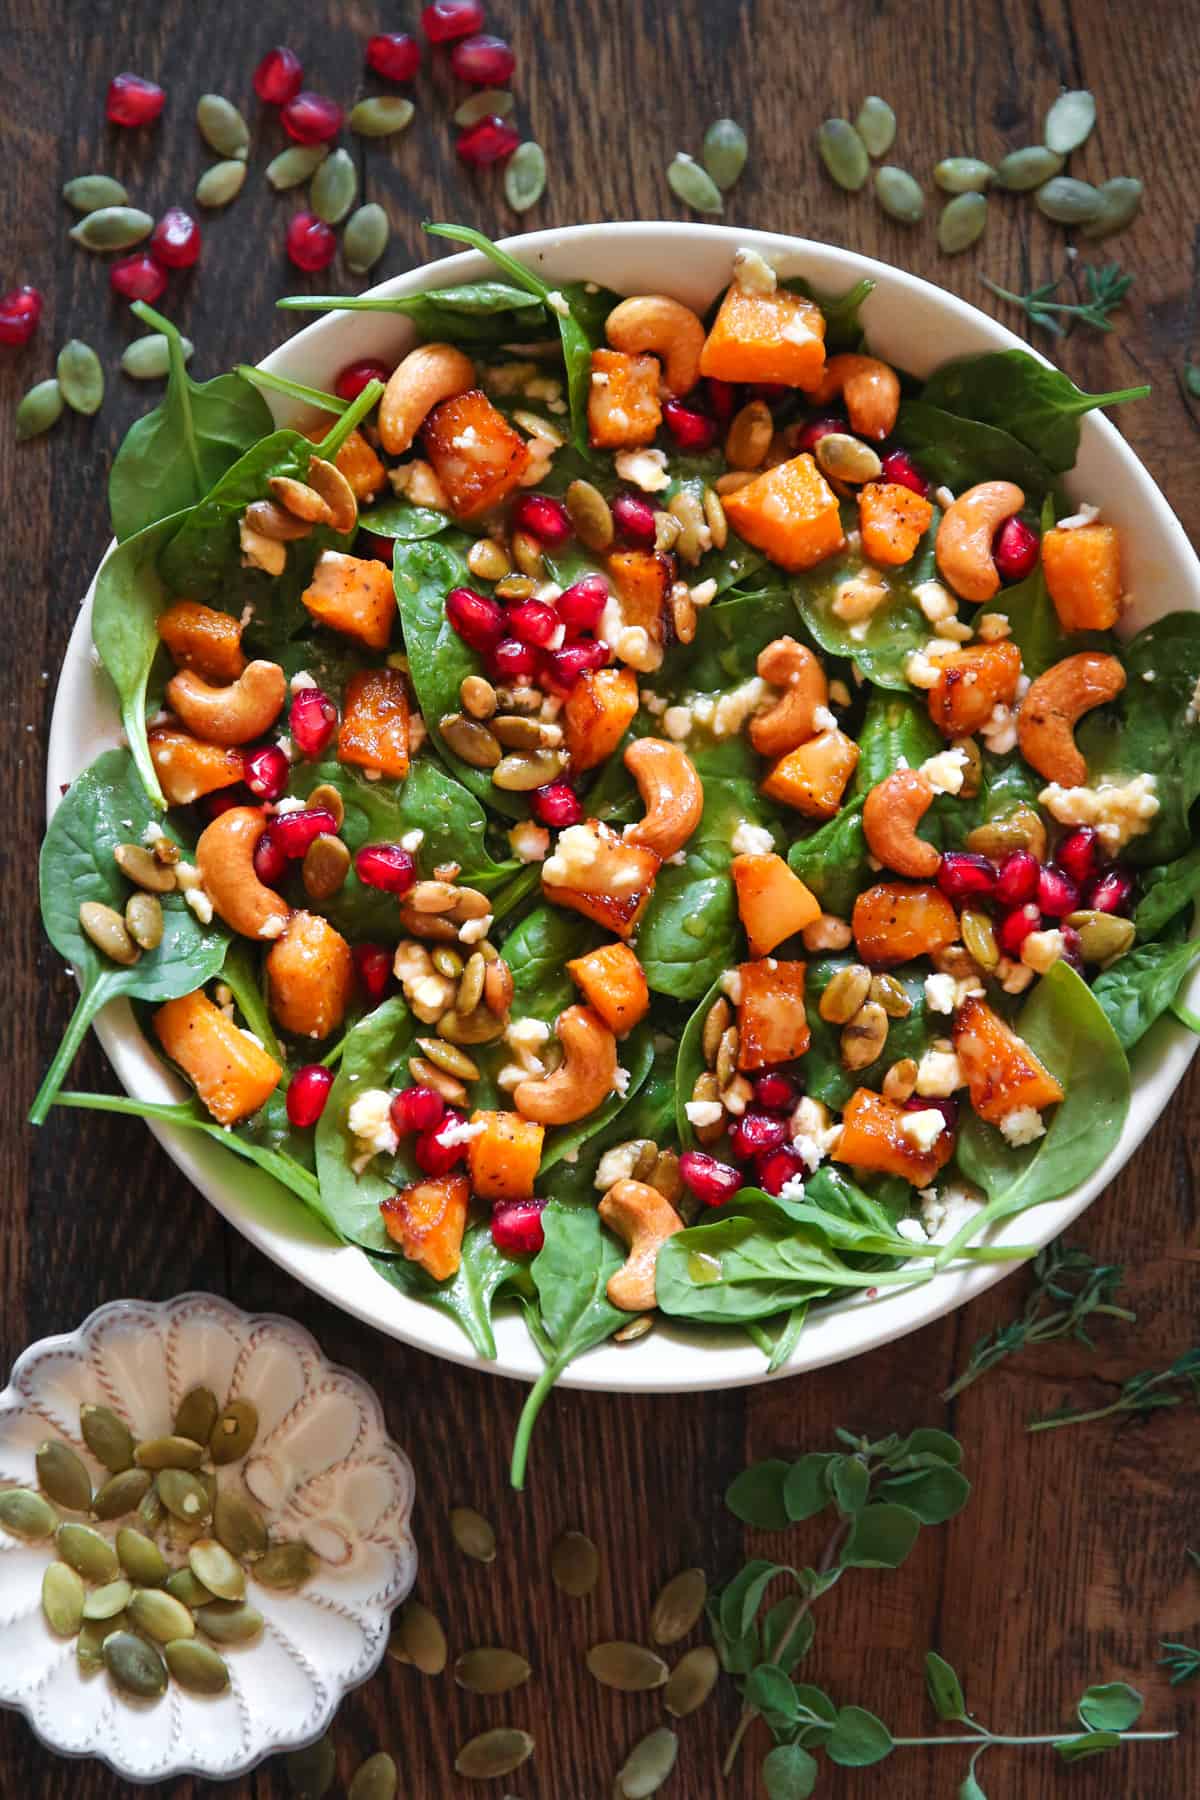 Butternut squash salad with spinach, cashews, pumpkin seeds, feta cheese, pomegranate seeds, and mustard honey-lime dressing in a white bowl.